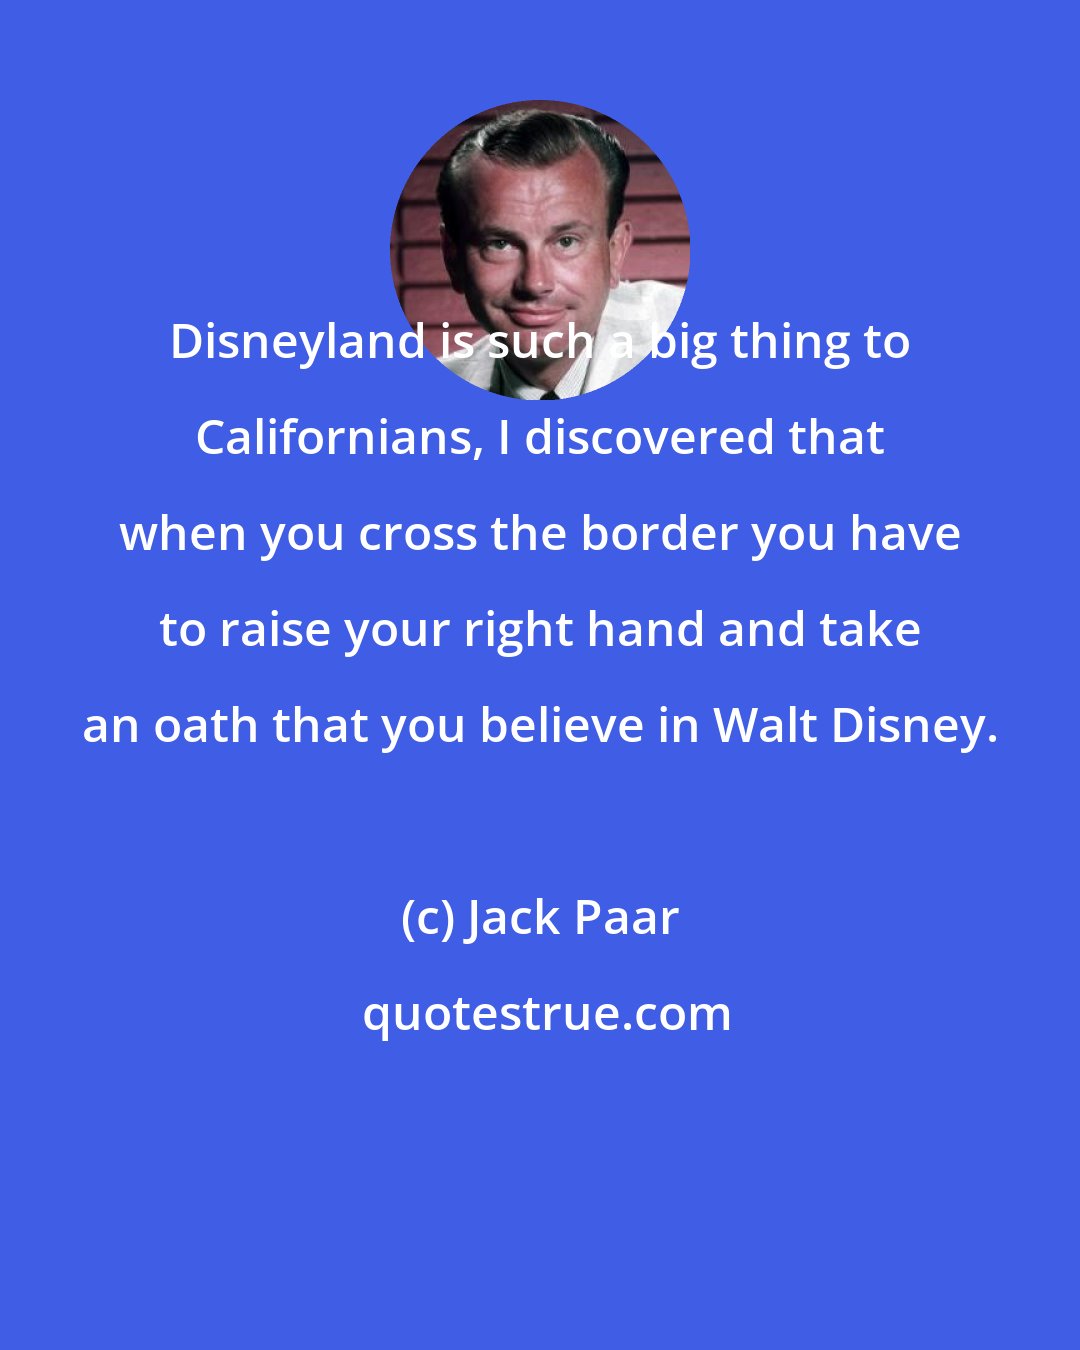 Jack Paar: Disneyland is such a big thing to Californians, I discovered that when you cross the border you have to raise your right hand and take an oath that you believe in Walt Disney.